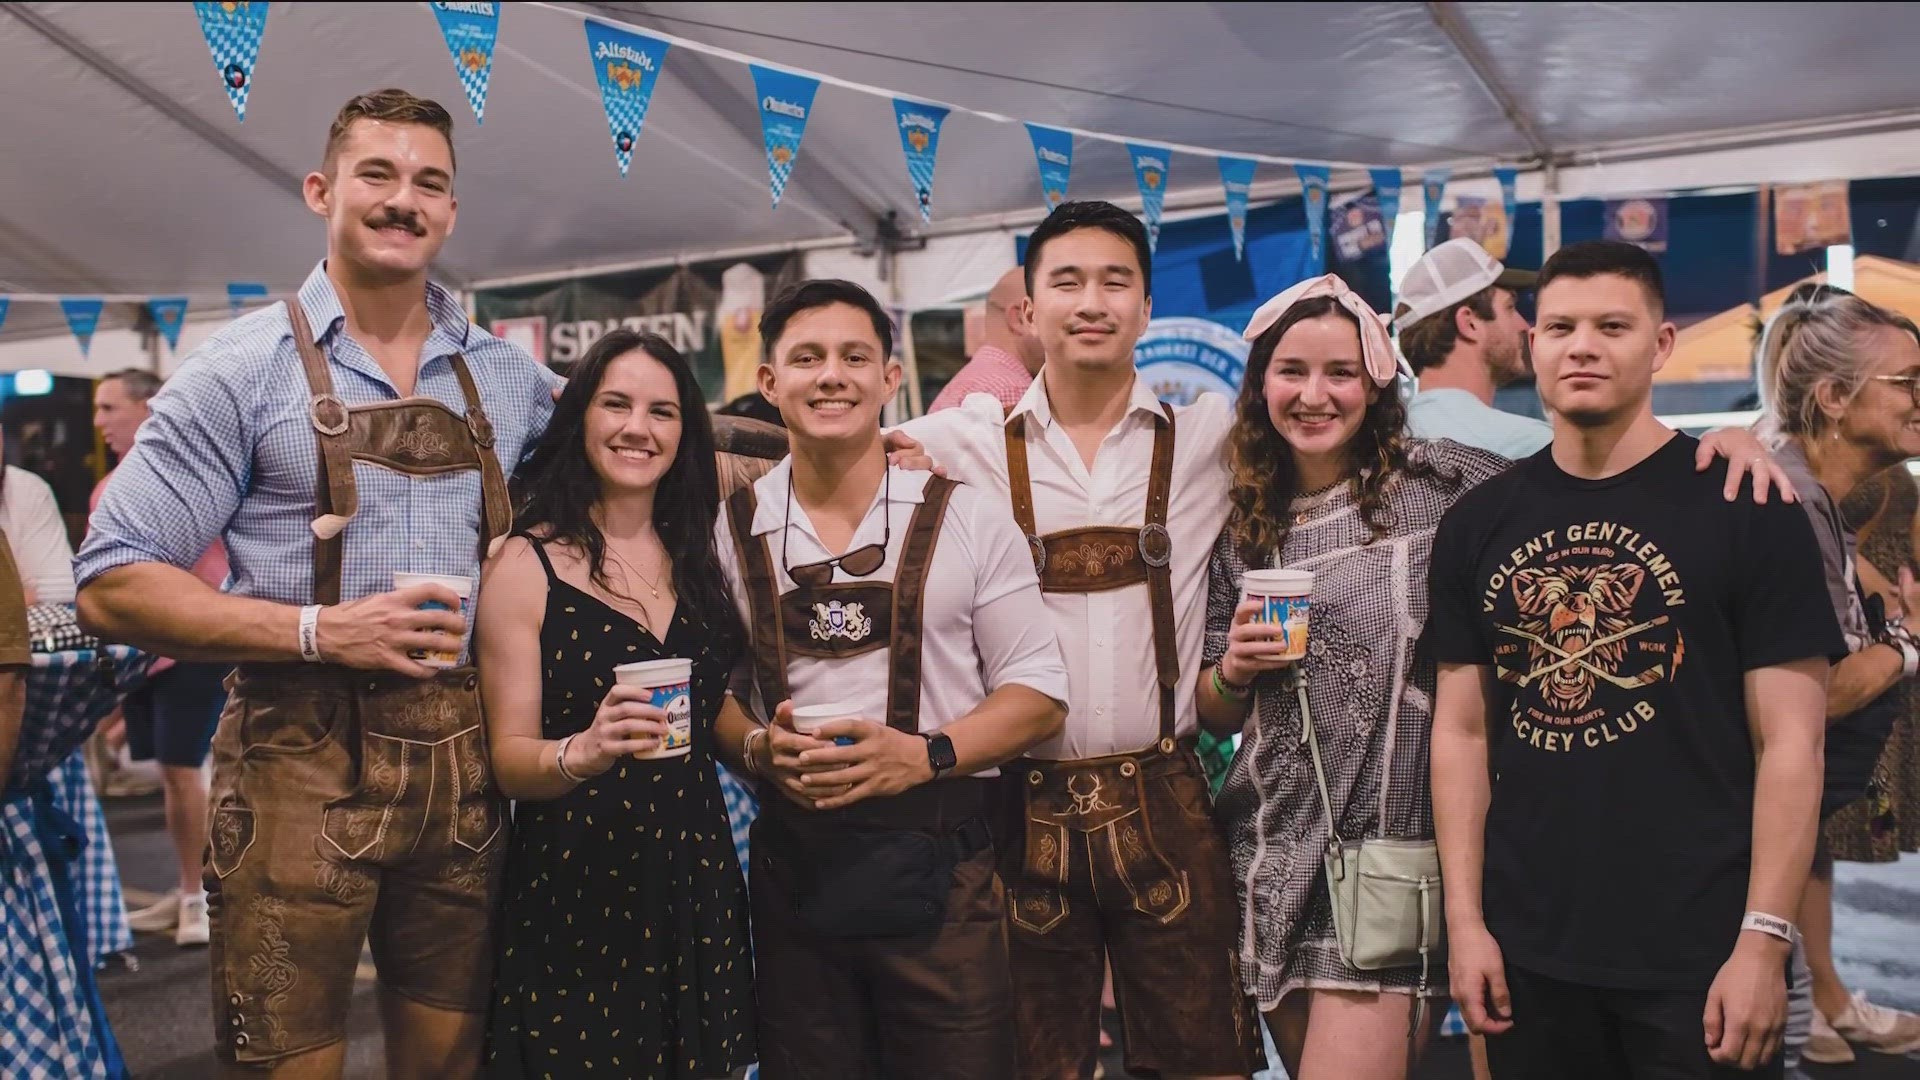 Fredericksburg is gearing up for another fall festival, but this time it's celebrating the city's German heritage with Oktoberfest!